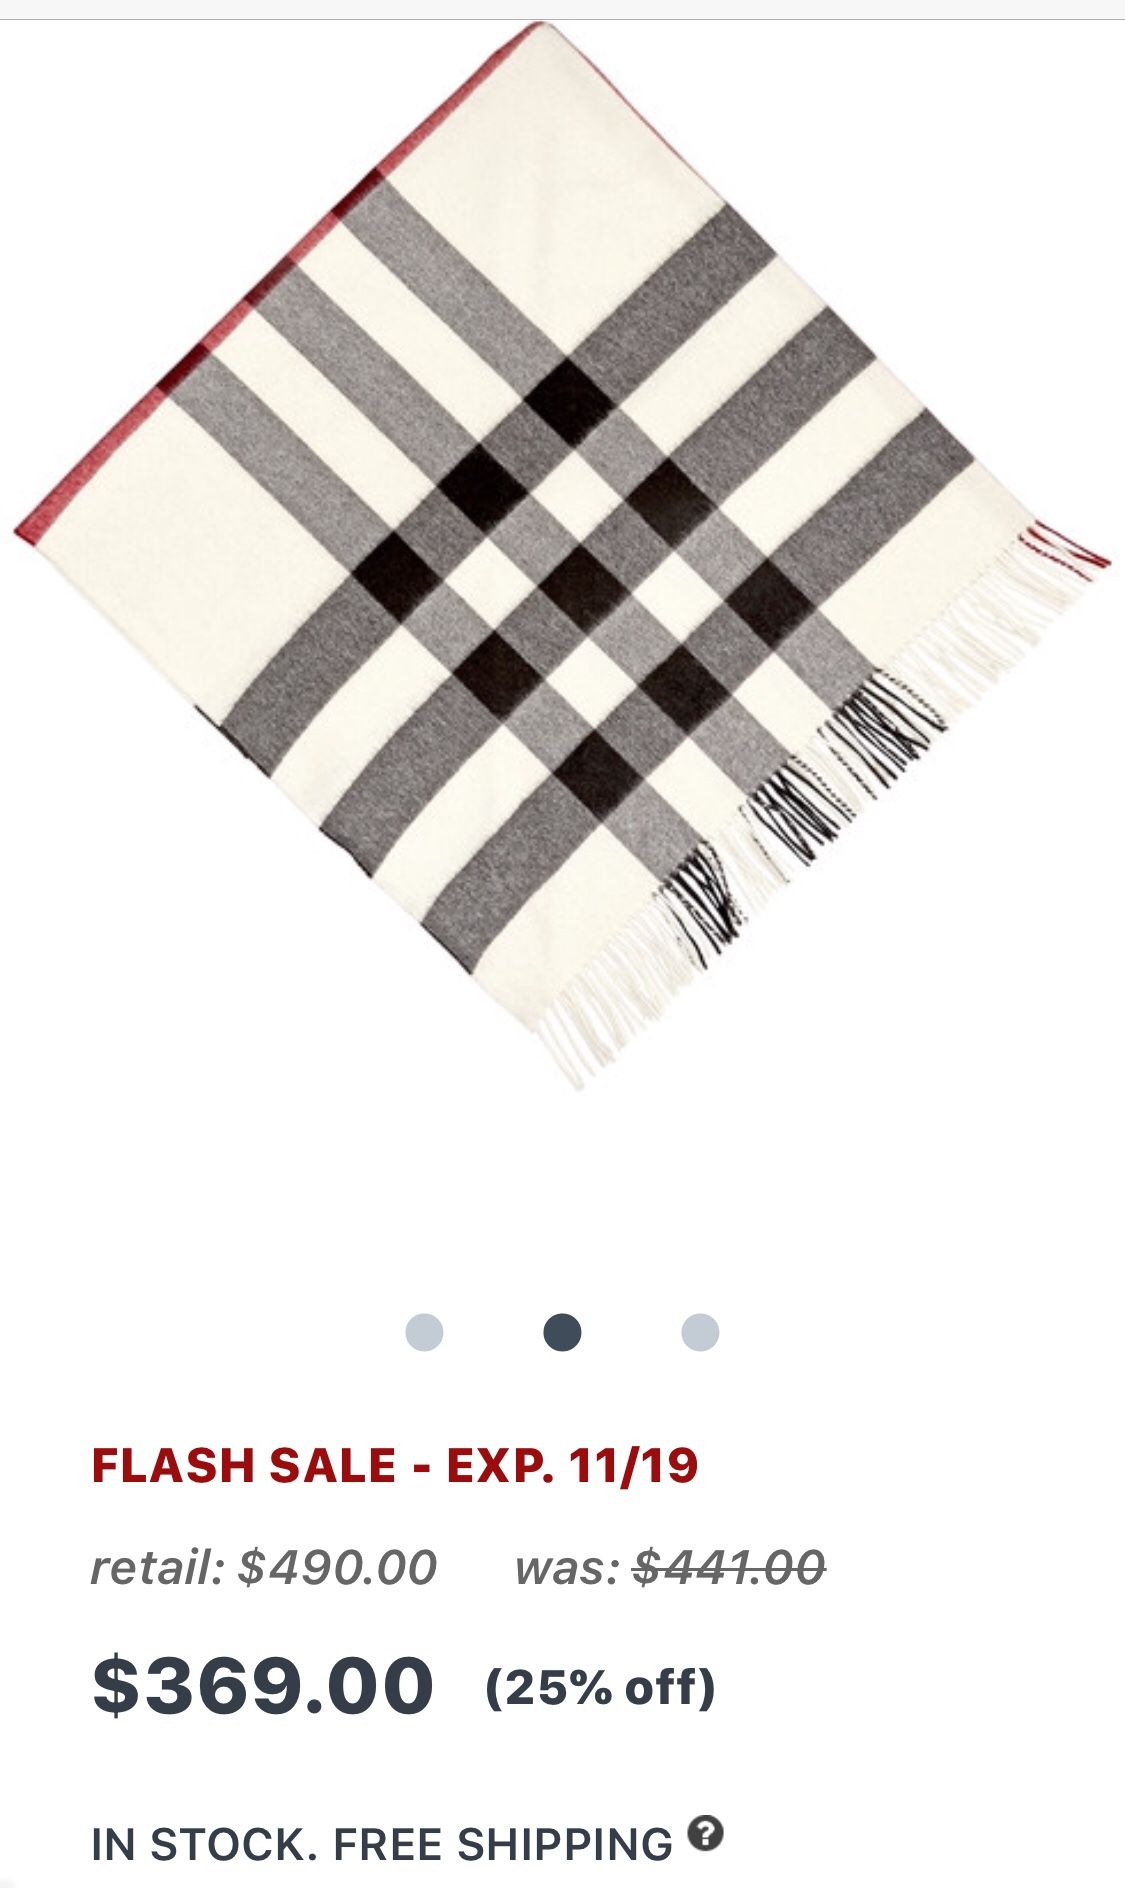 Burberry Brand new Fashion scarf 100% cashmere wool. In natural white color. Very very elegant. In stores it sells for $390. My wife doesn’t want it.